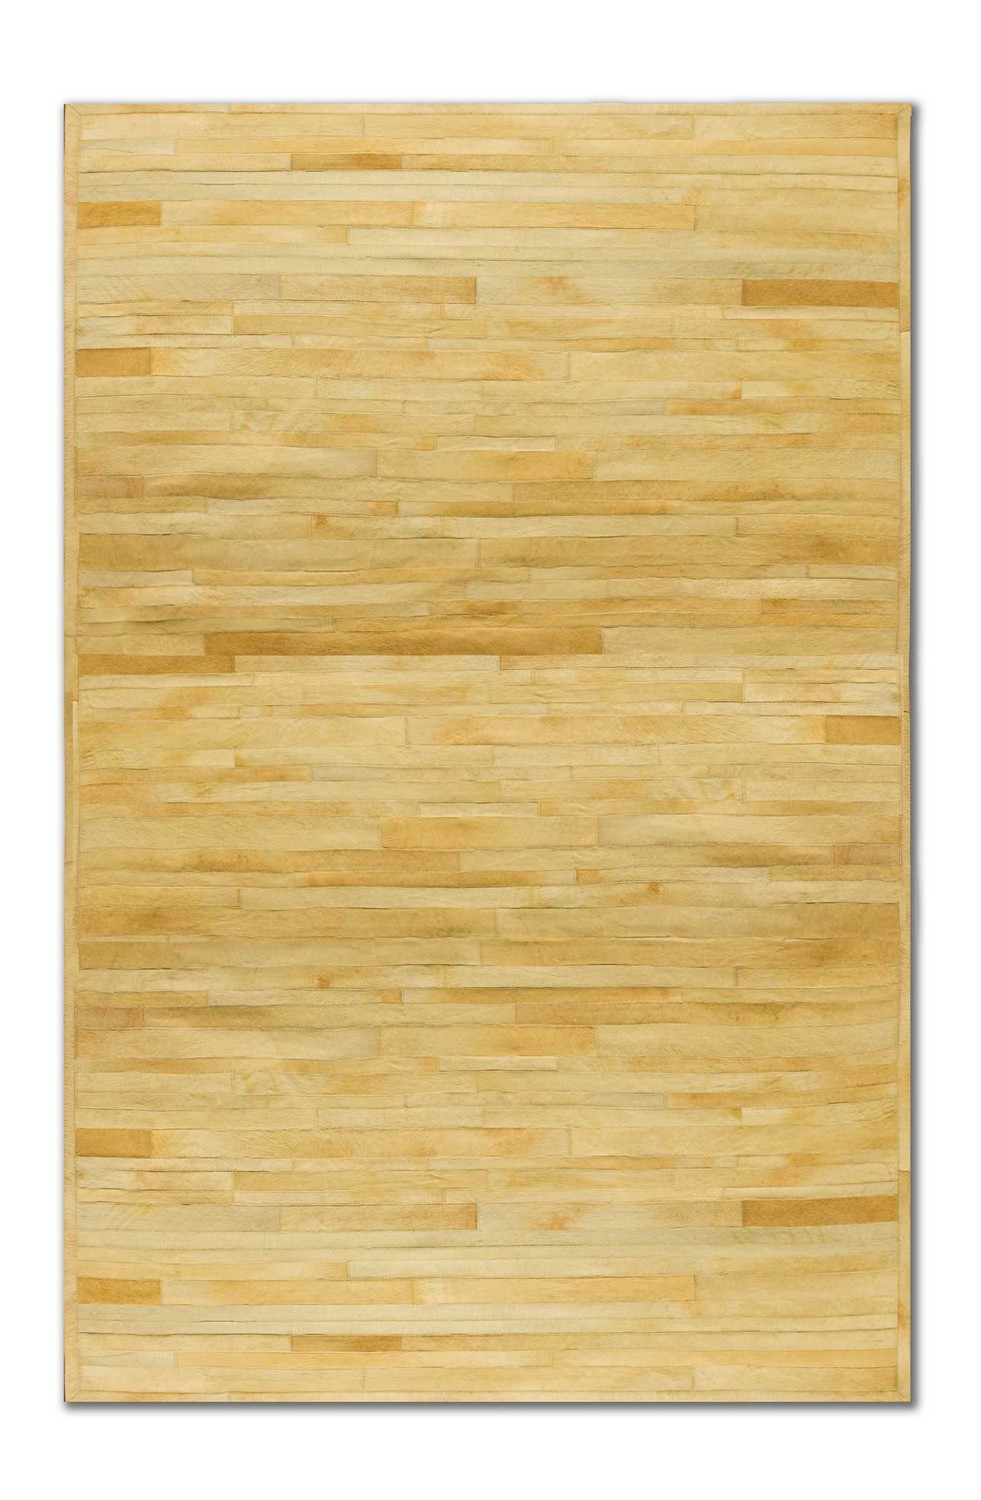 96" x 120" Natural Linear, Cowhide Stitched - Area Rug